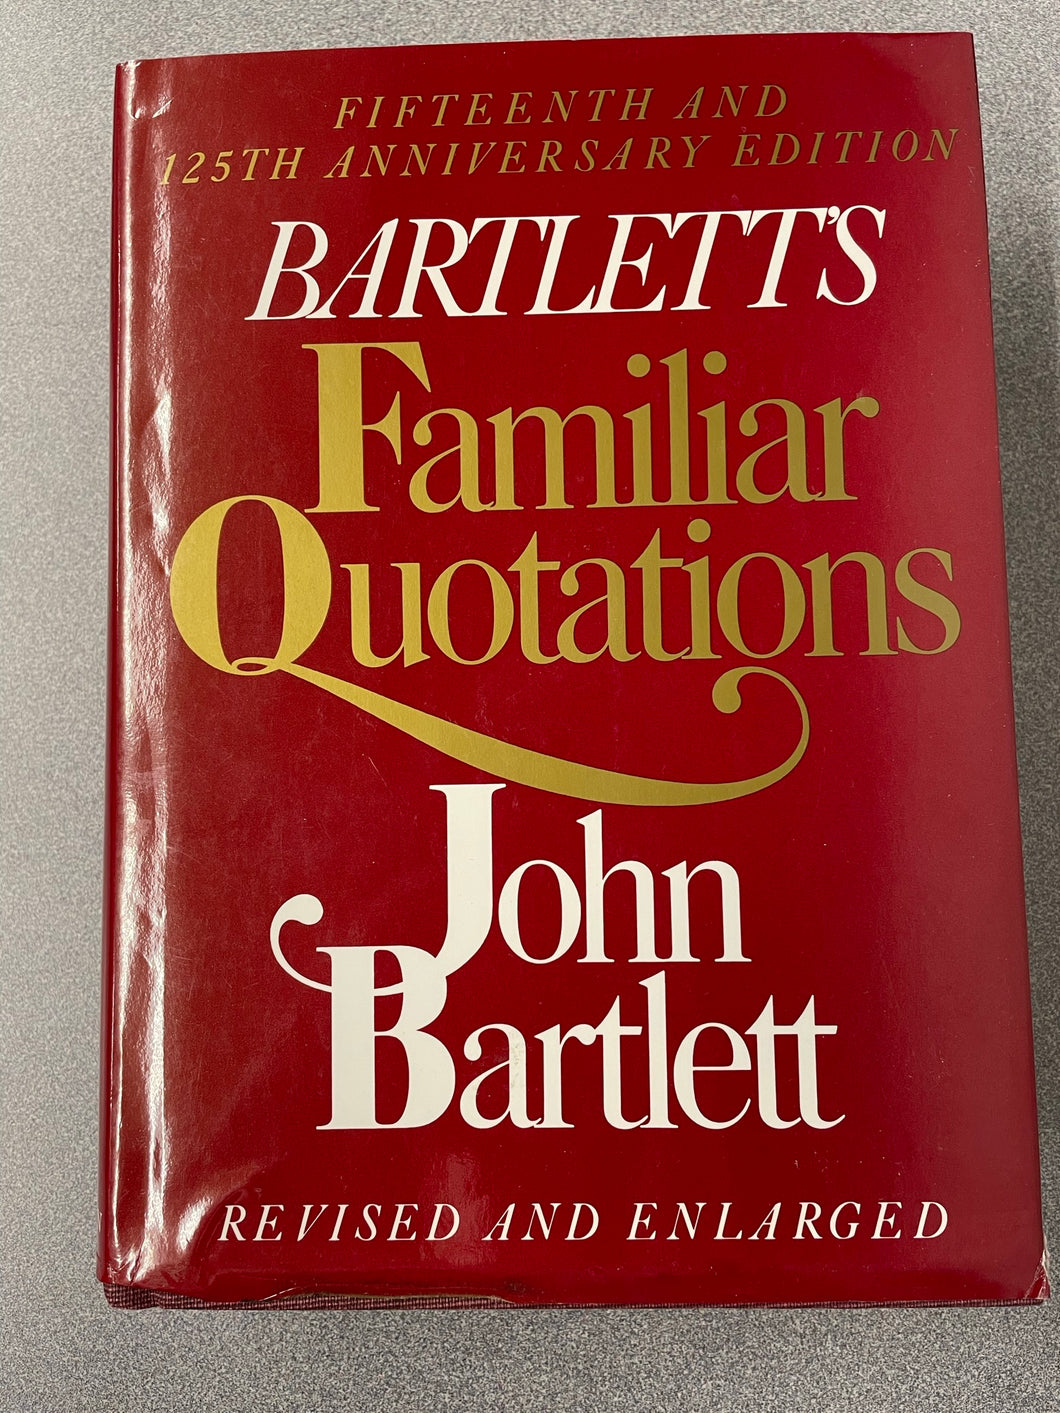 Familiar Quotations: A Collection of Passages, Phrases and Proverbs Traced To Their Sources In Ancient and Modern Literature, 15th and 125th Anniversary Edition, Bartlett, John [1980] REF 6/23